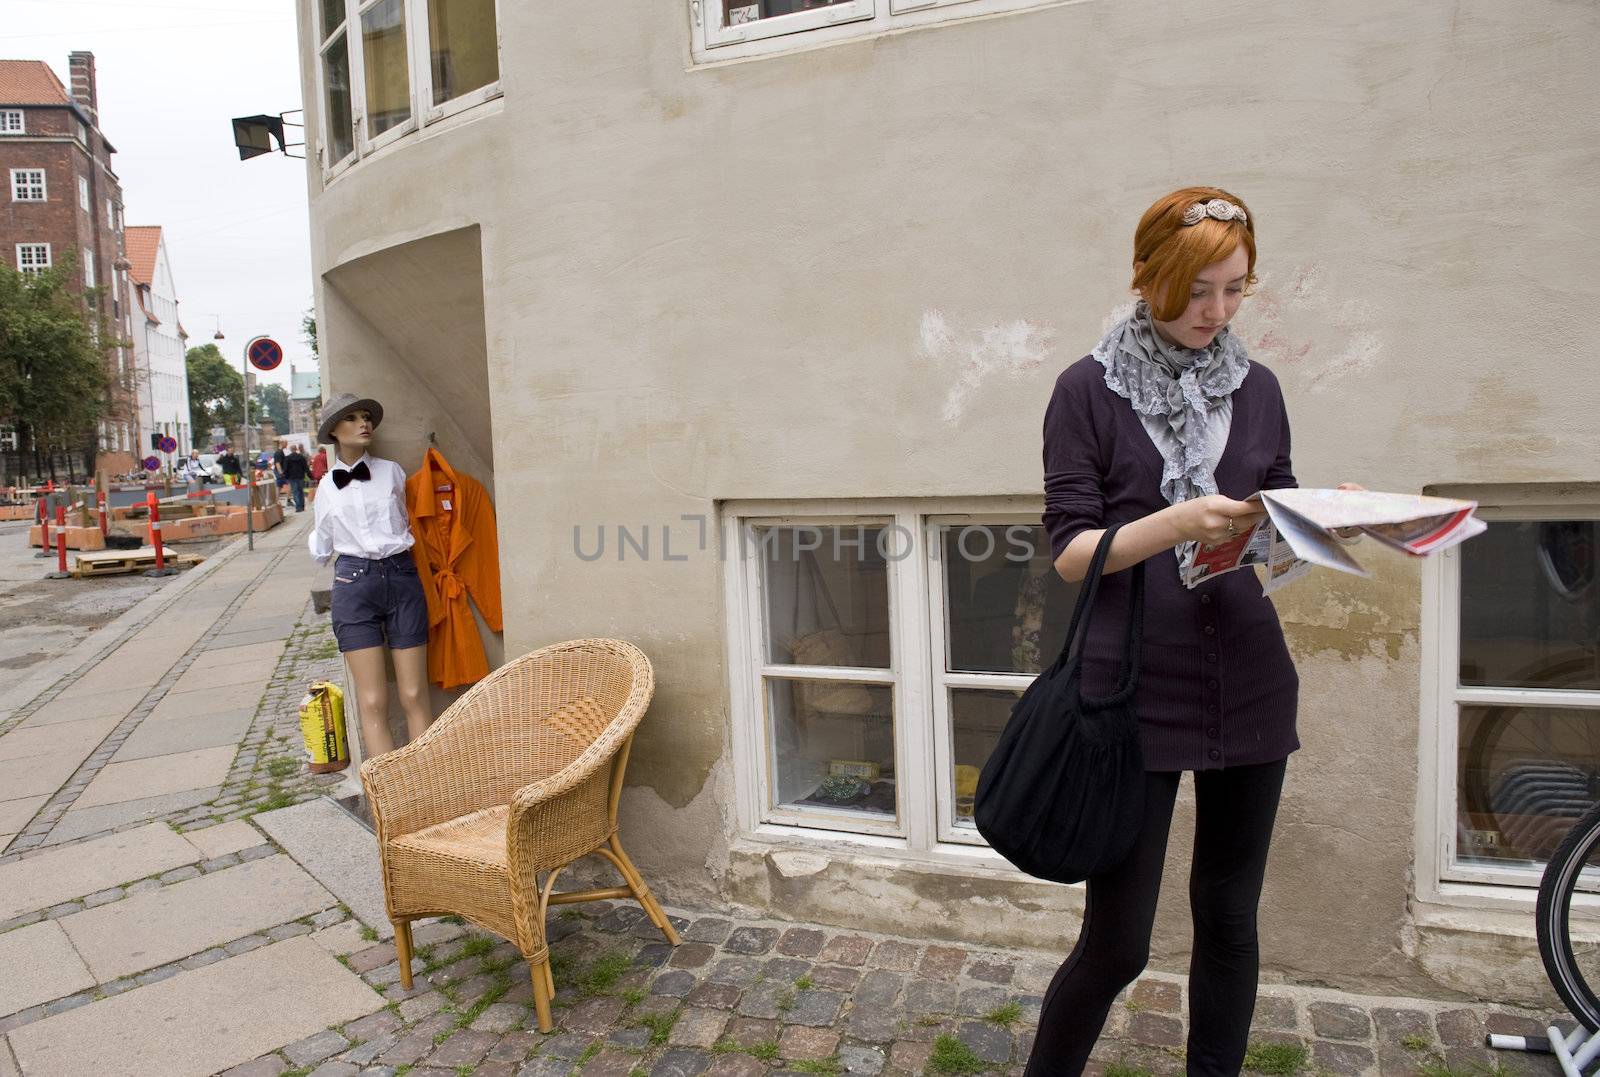 The young lonely woman on the street in the center of Copenhagen Denmark. Taken on June 2012